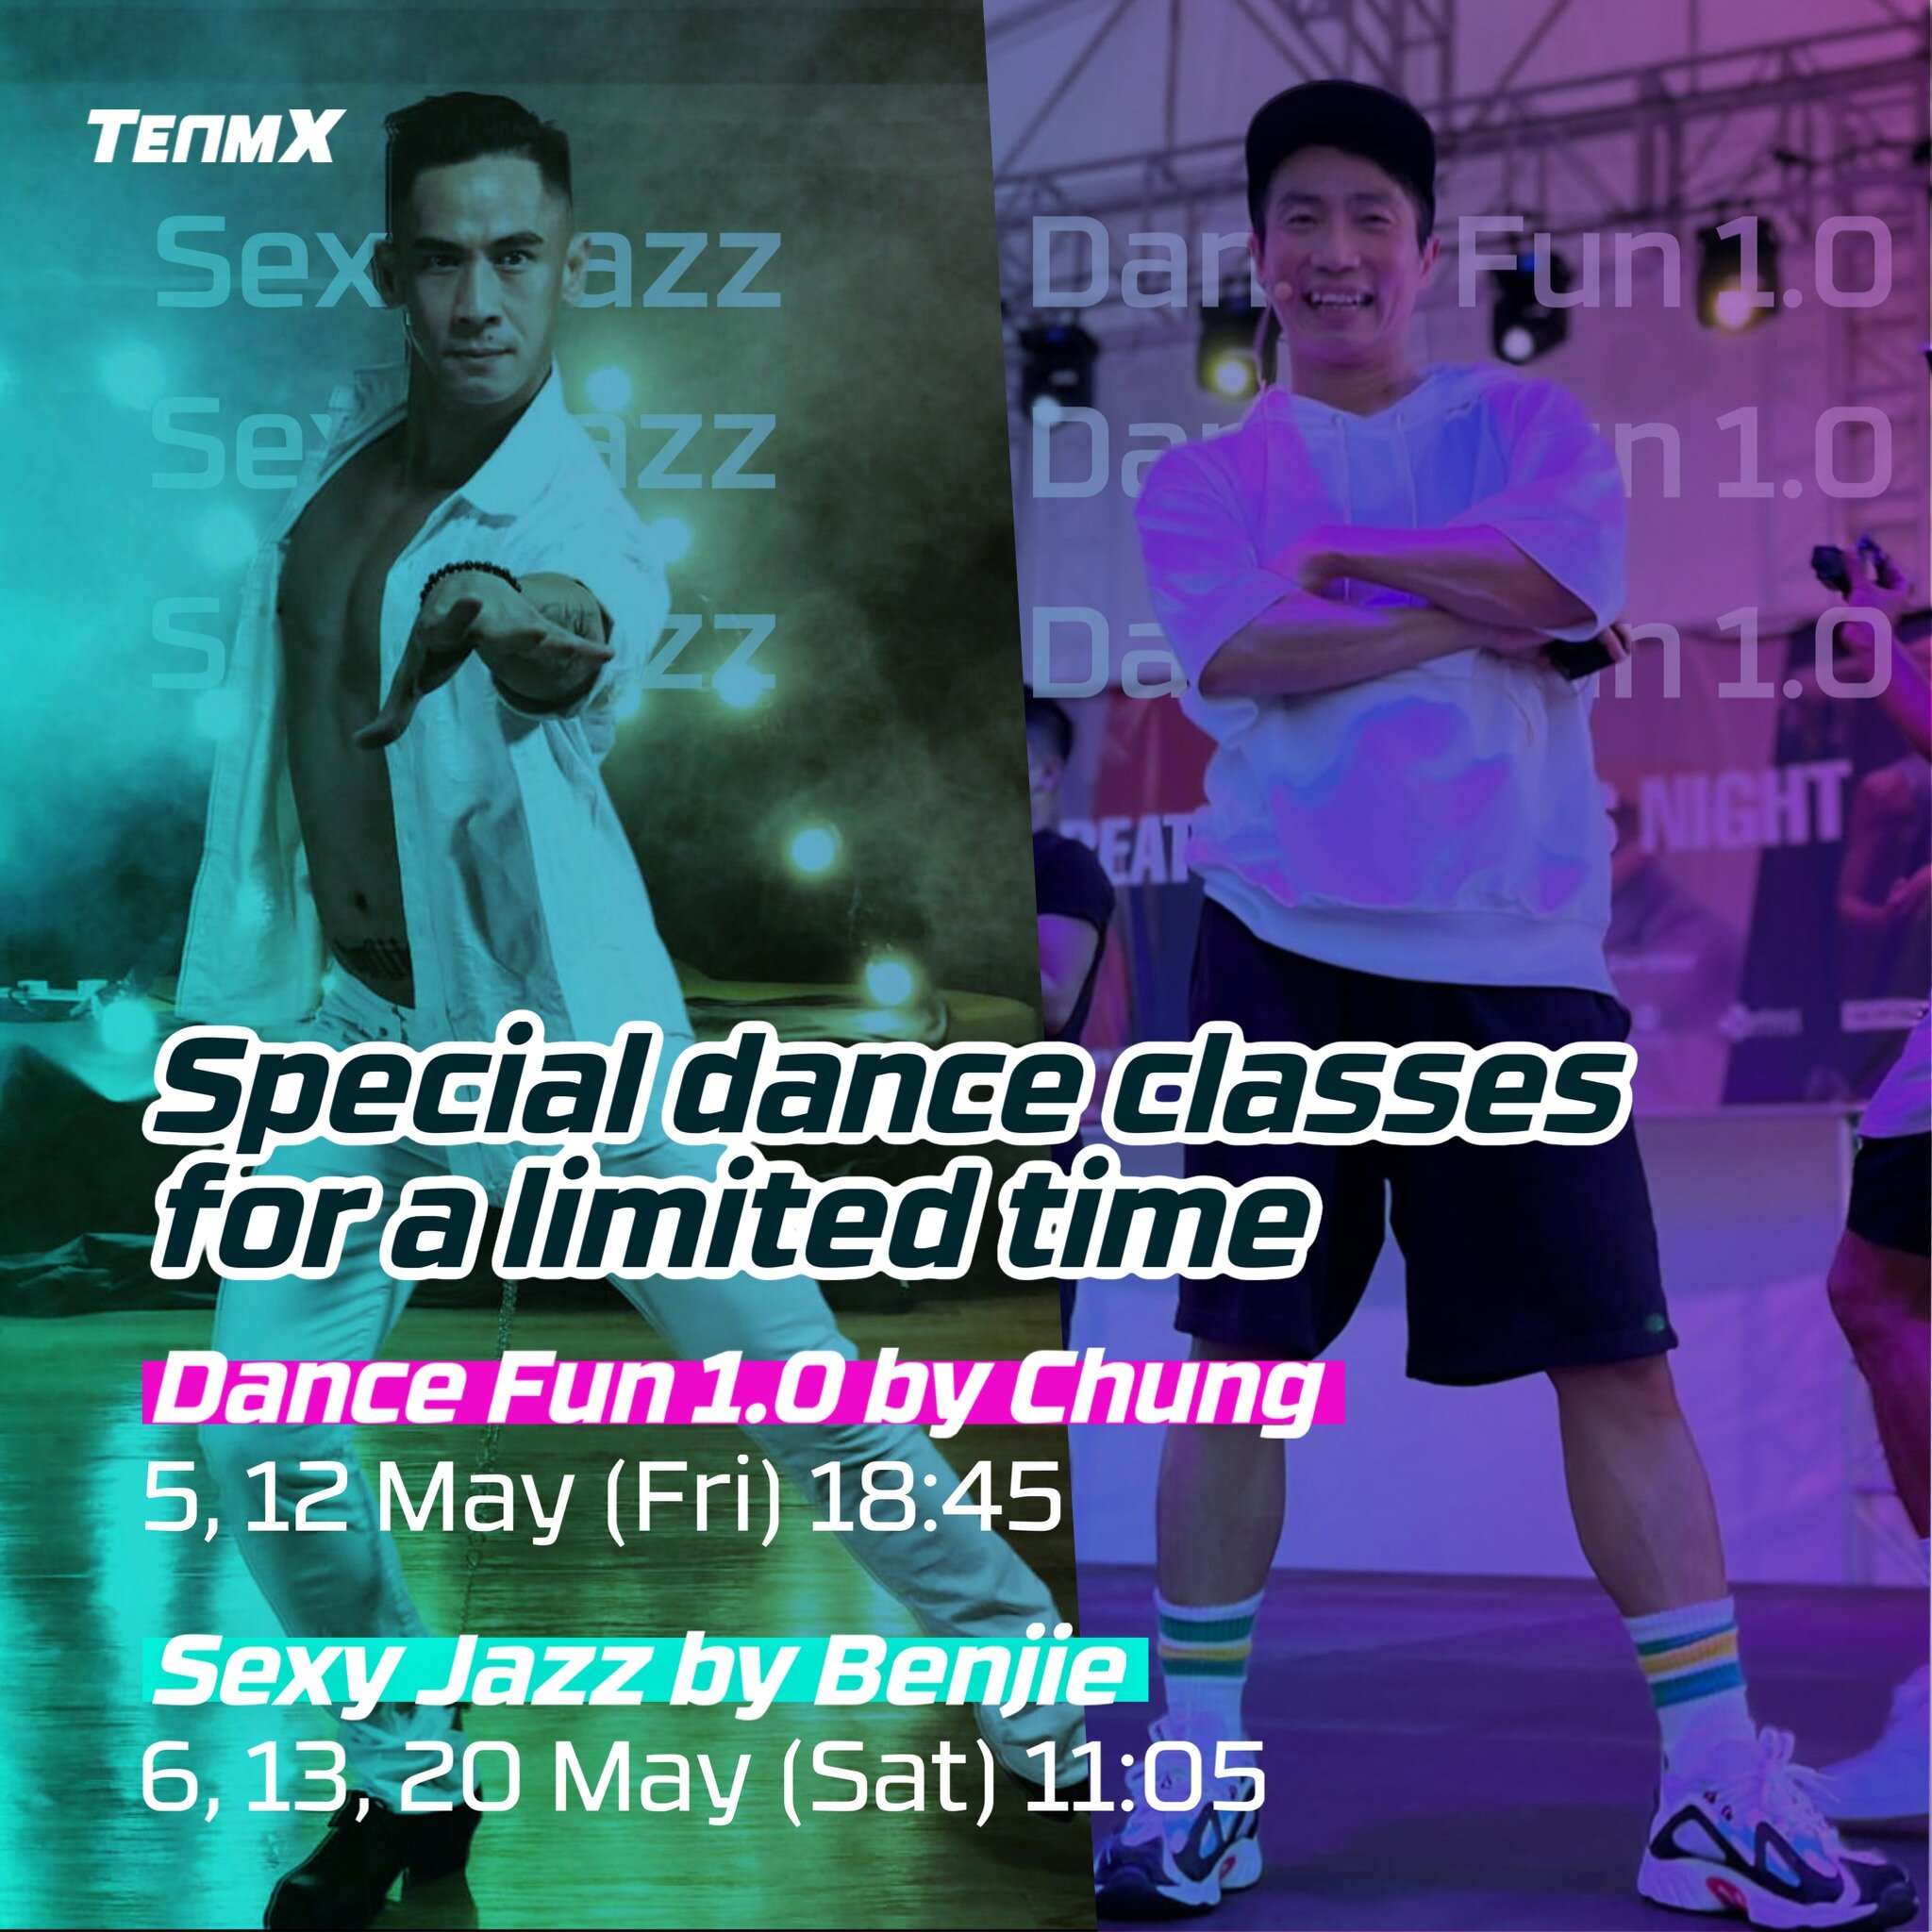 Time-Limited Dance Classes in May
Learn the beginner level of Jazz Funk with Chung Fridays (5 &amp; 12 May) at 18:45, and get your groove on with Sexy Jazz with Benjie Saturdays (6, 13 &amp; 20 May) at 11:05. Don't miss out on this limited-time oppor